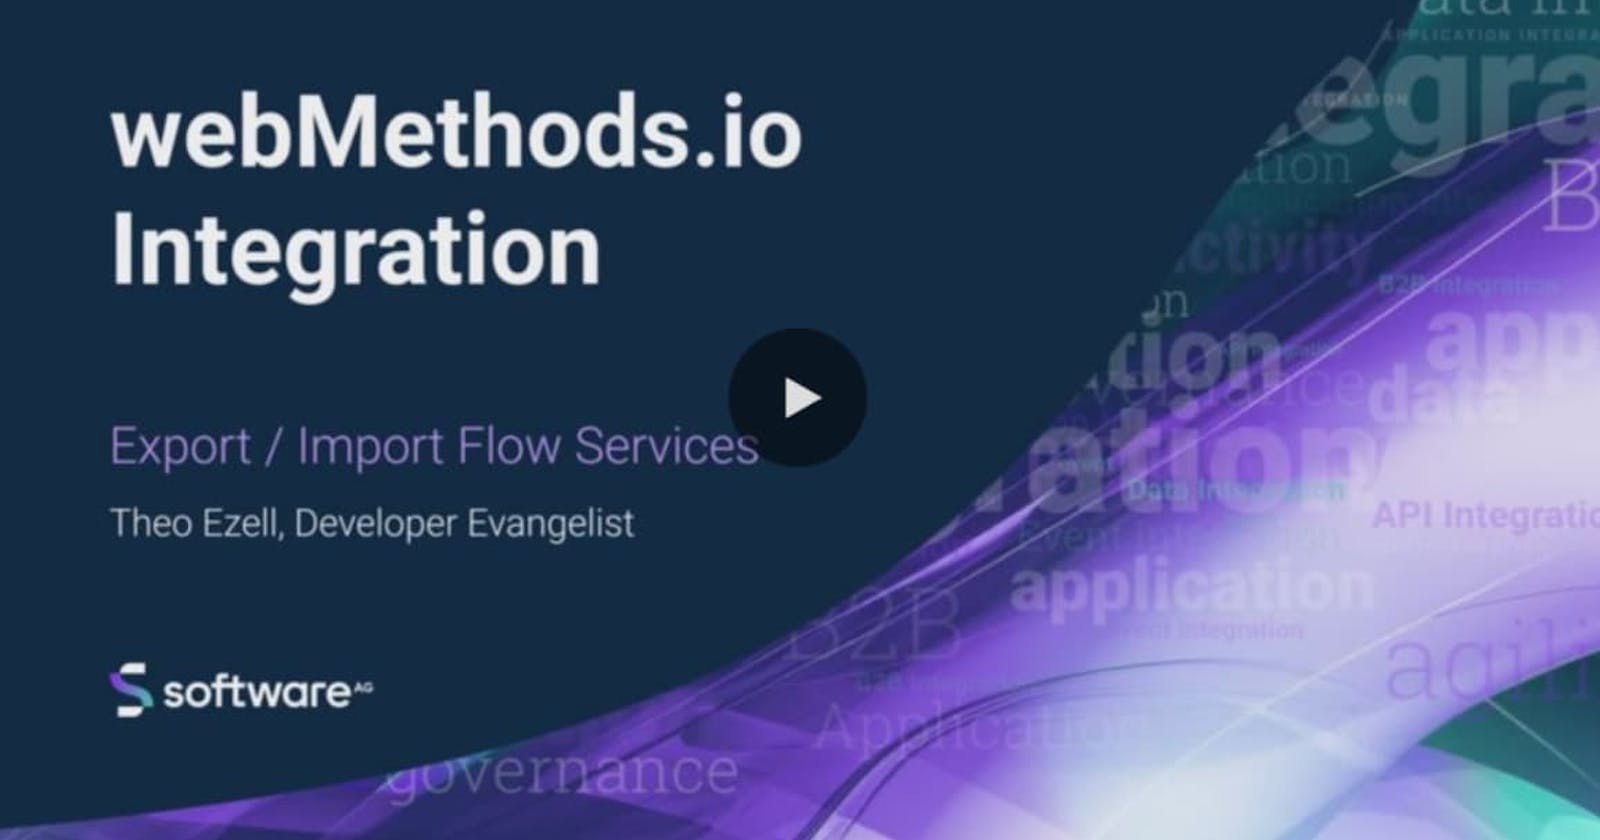 Export and import Flow services with webMethods.io Integration